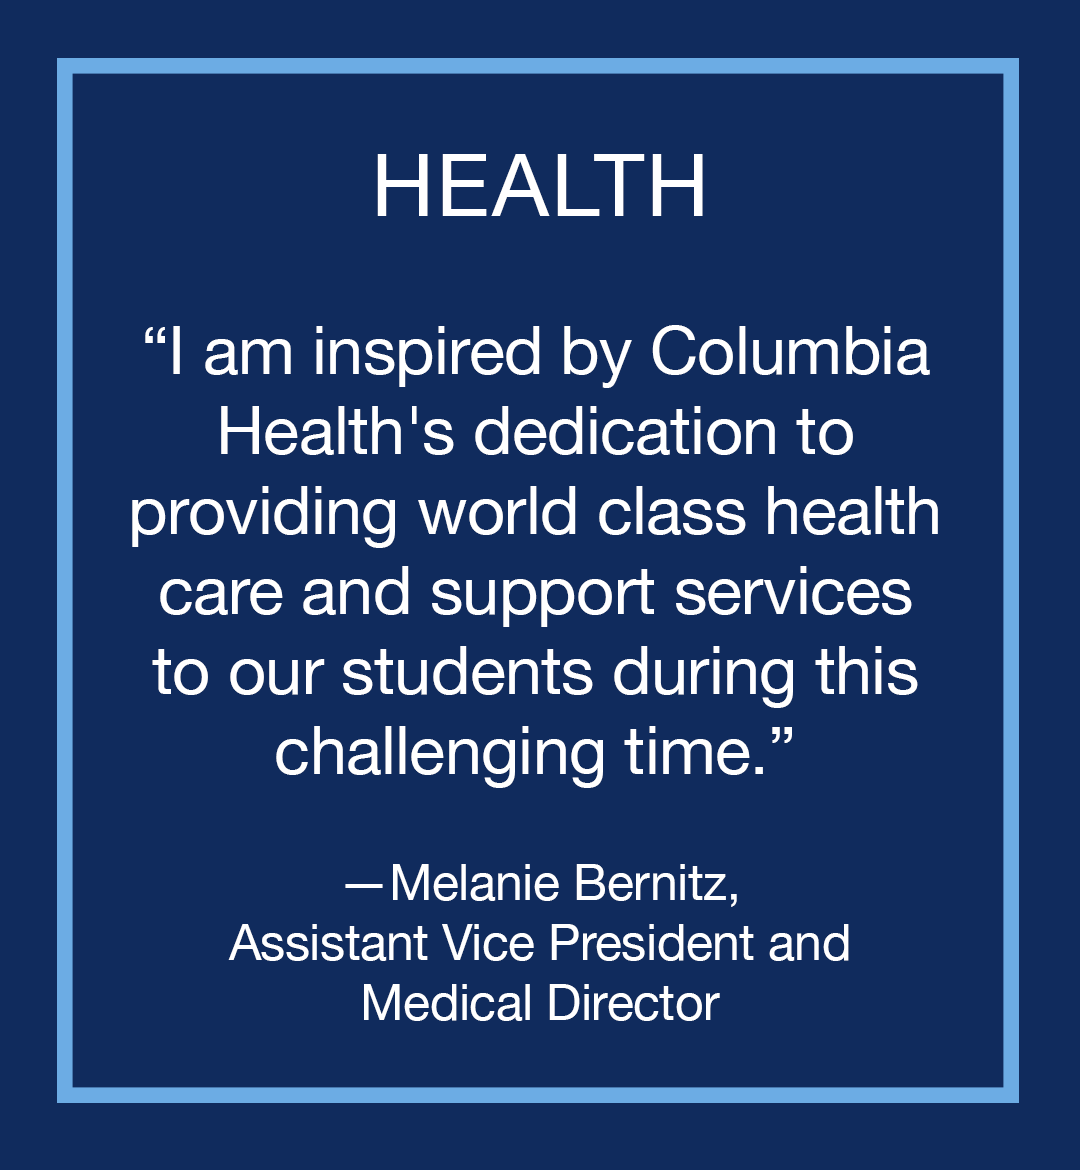 Image with text: Health, "I am inspired by Columbia Health's dedication to providing world class health care and support services to our students during this challenging time," Melanie Bernitz, Assistant Vice President and Medical Director 